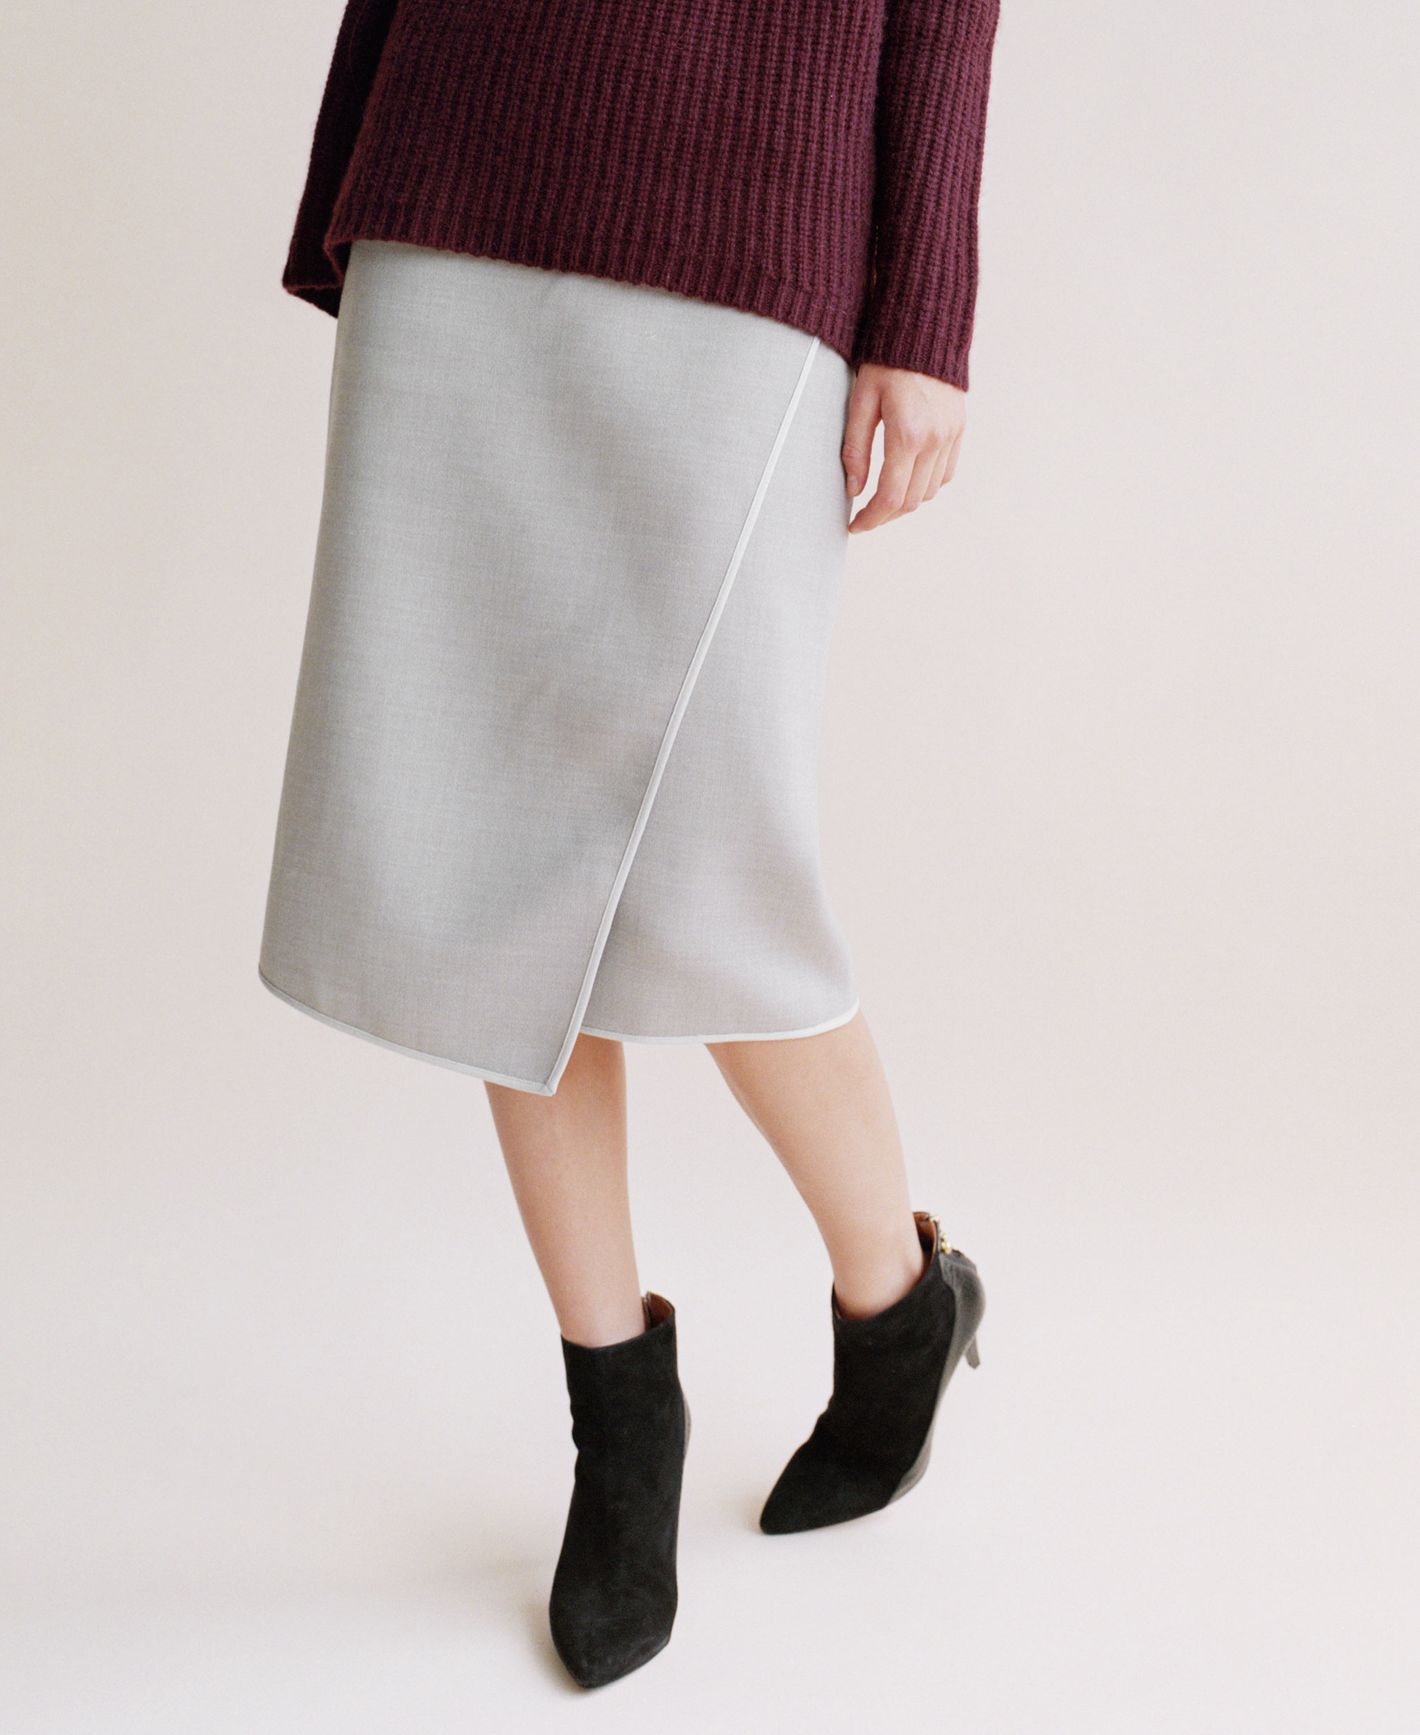 Outfit of the Week: A Cozy Sweater and Work-Friendly Skirt